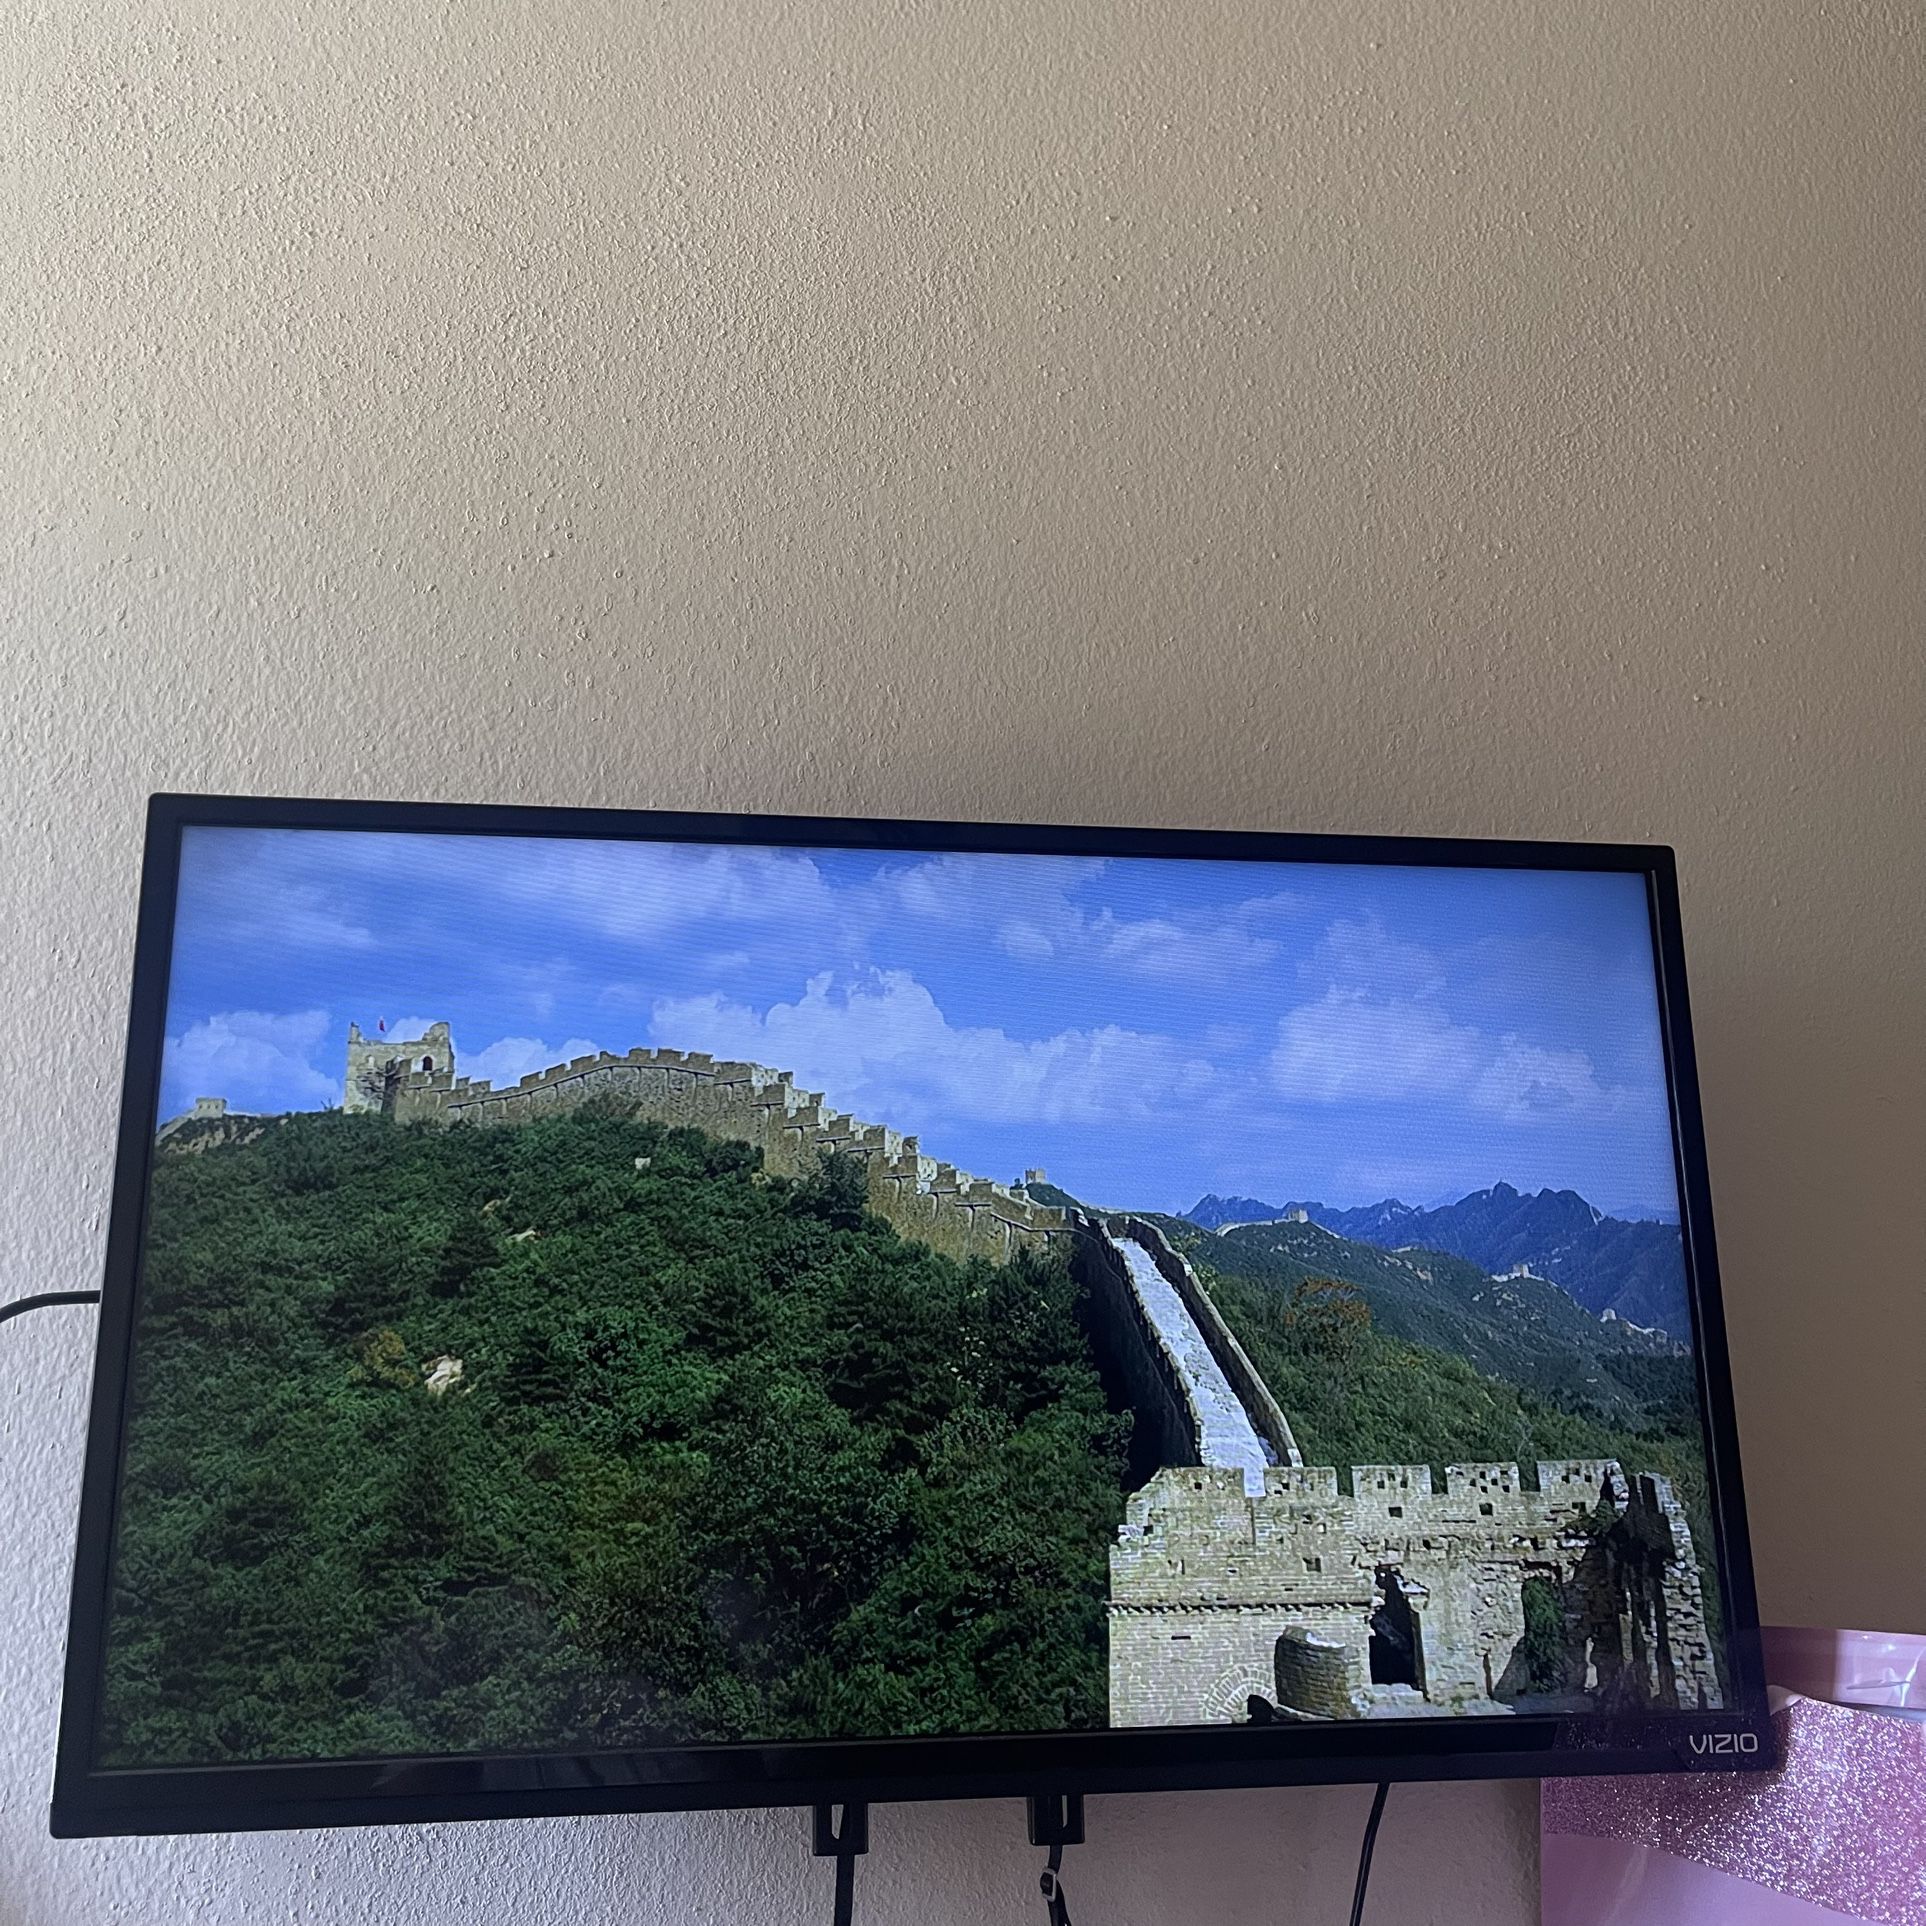 Vizio 32” Working Perfectly Fine With wall mount